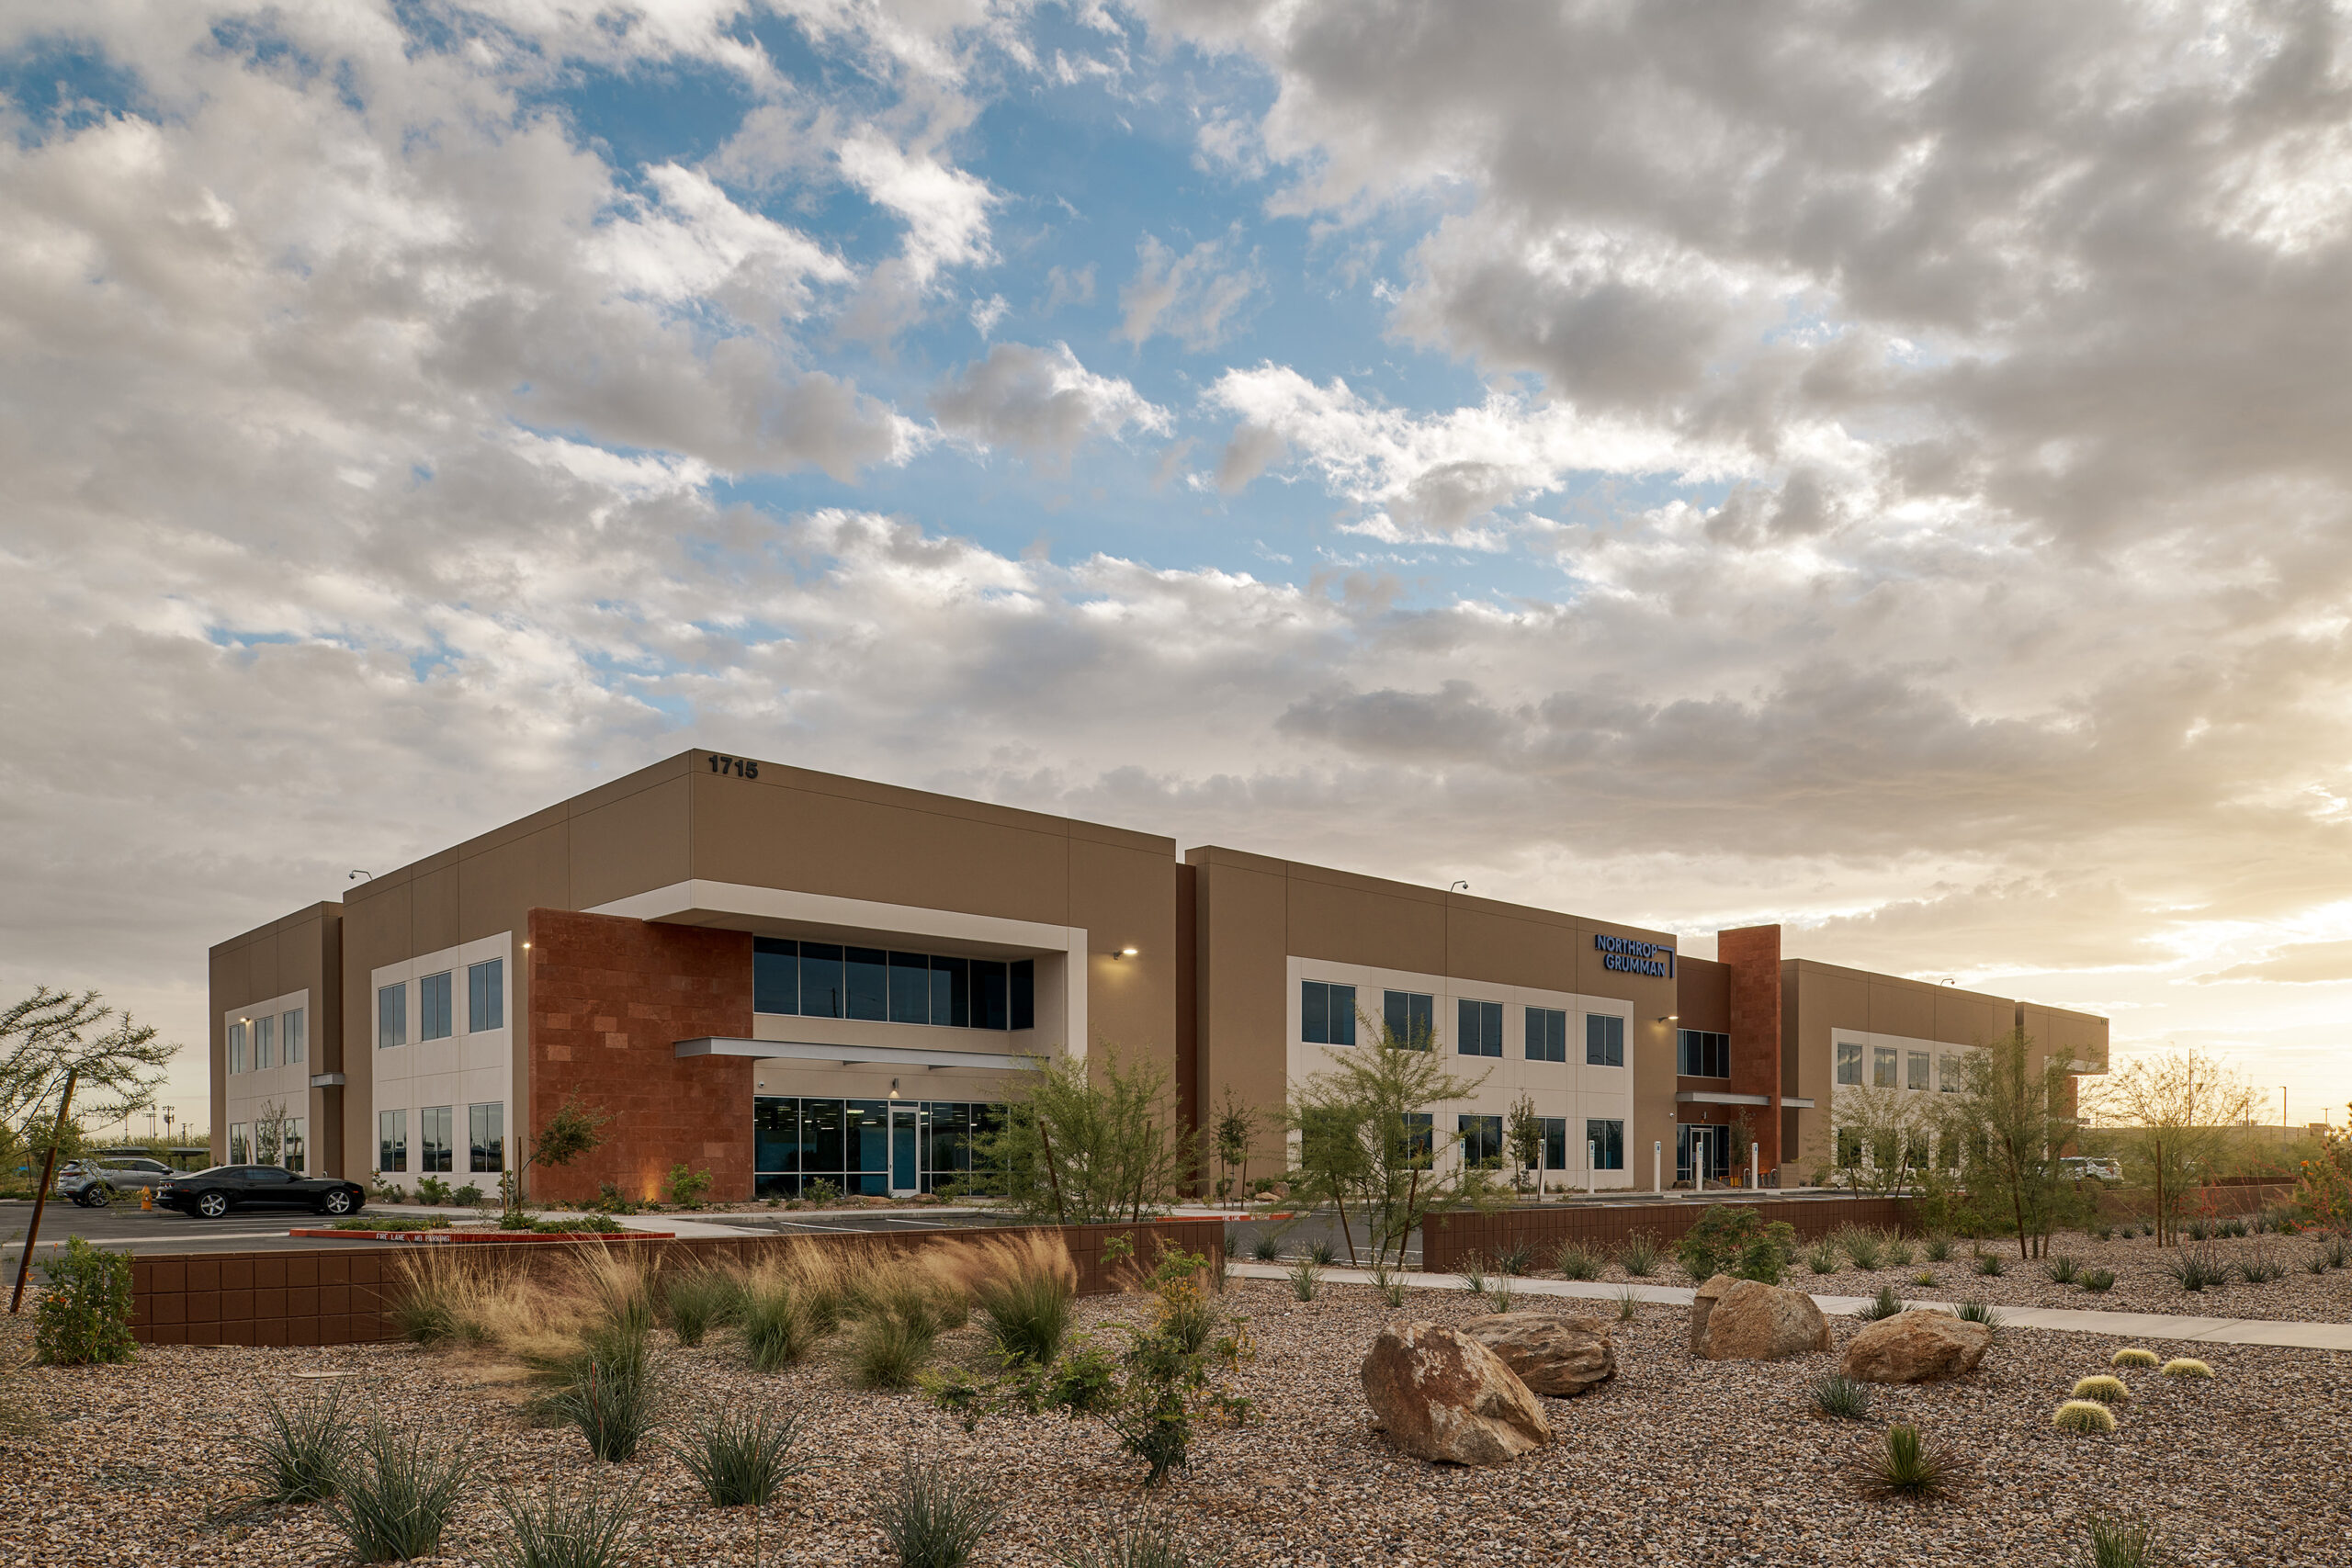 A two story office building in a desert setting at sunset